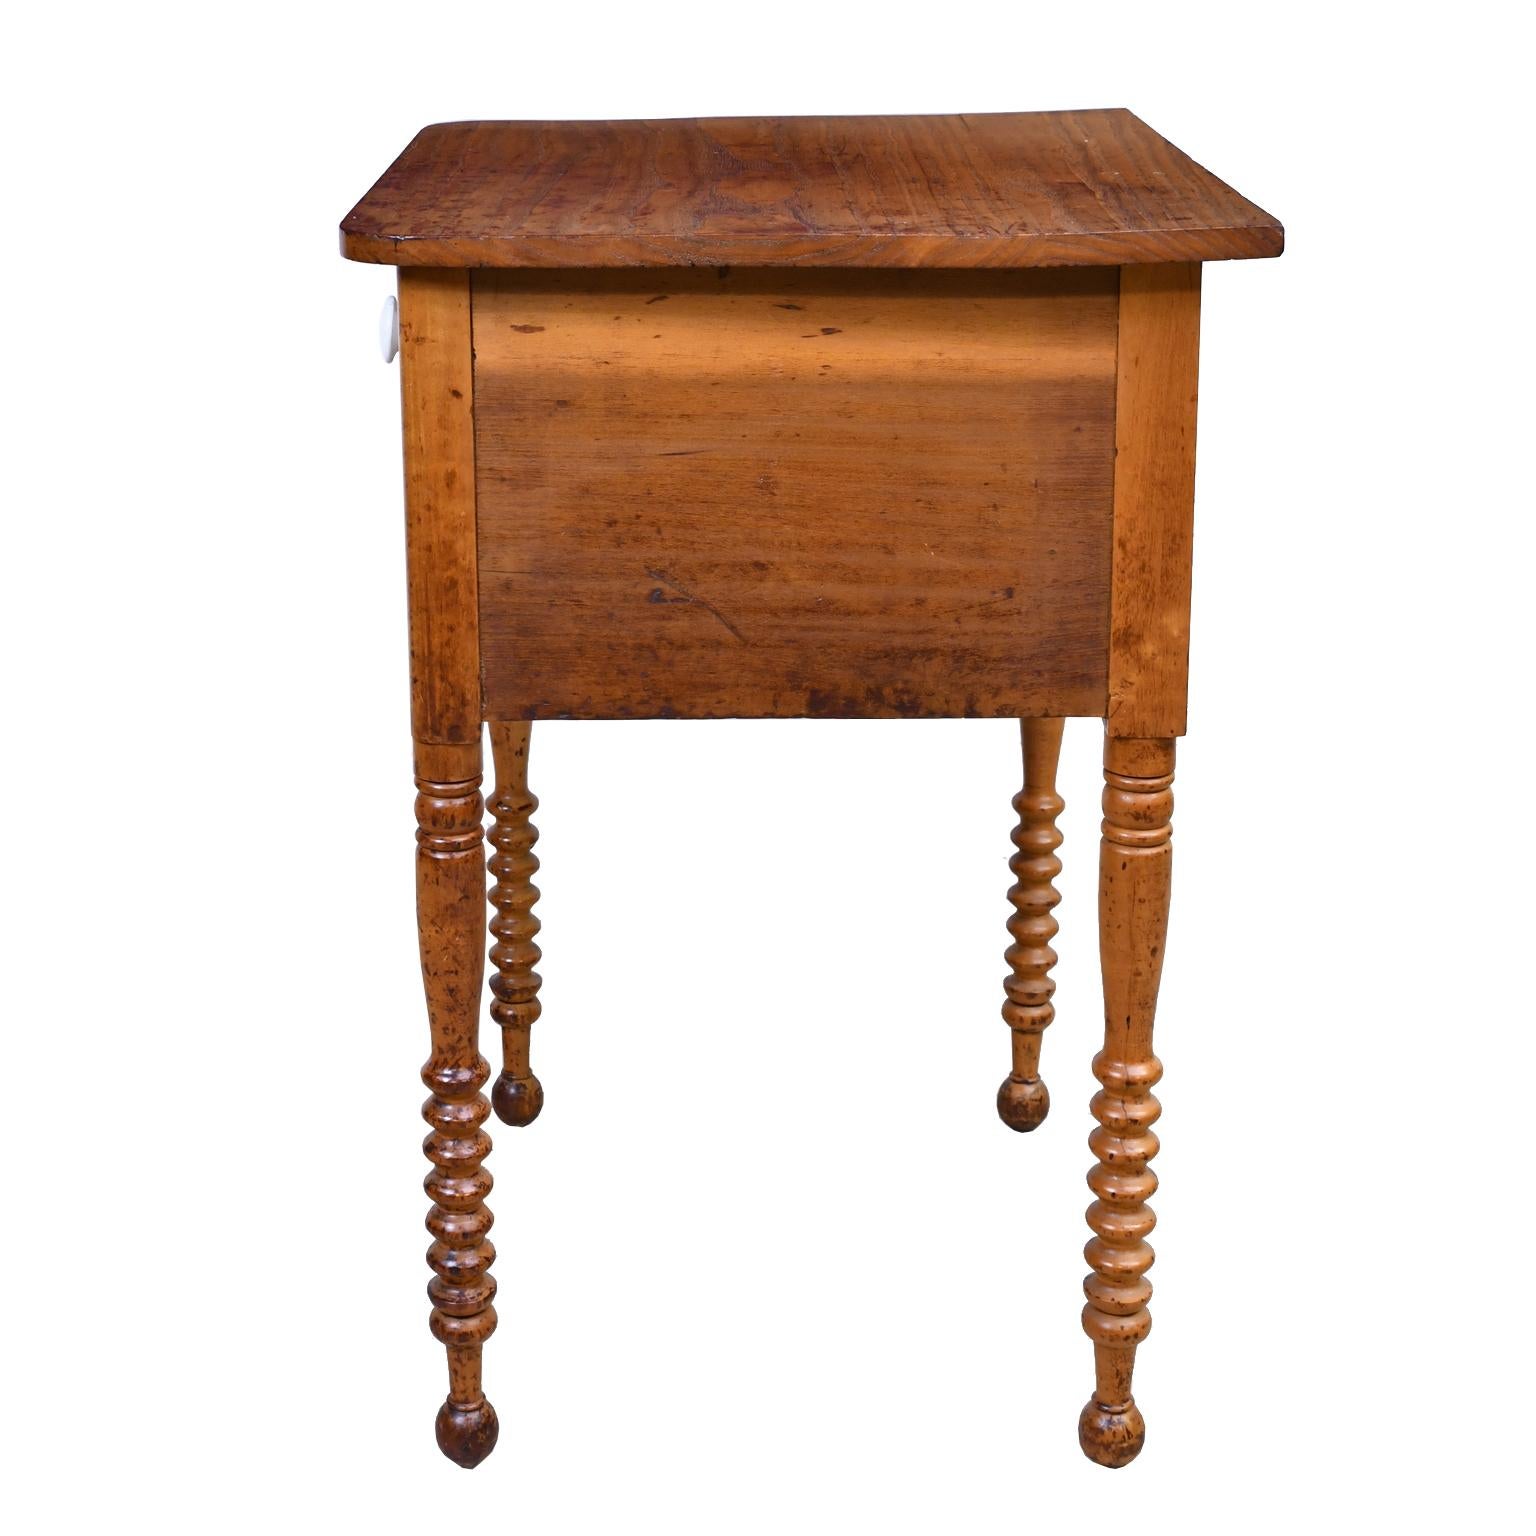 Turned Federal Country Table or Nightstand in Fruitwood with Drawers, Pennsylvania